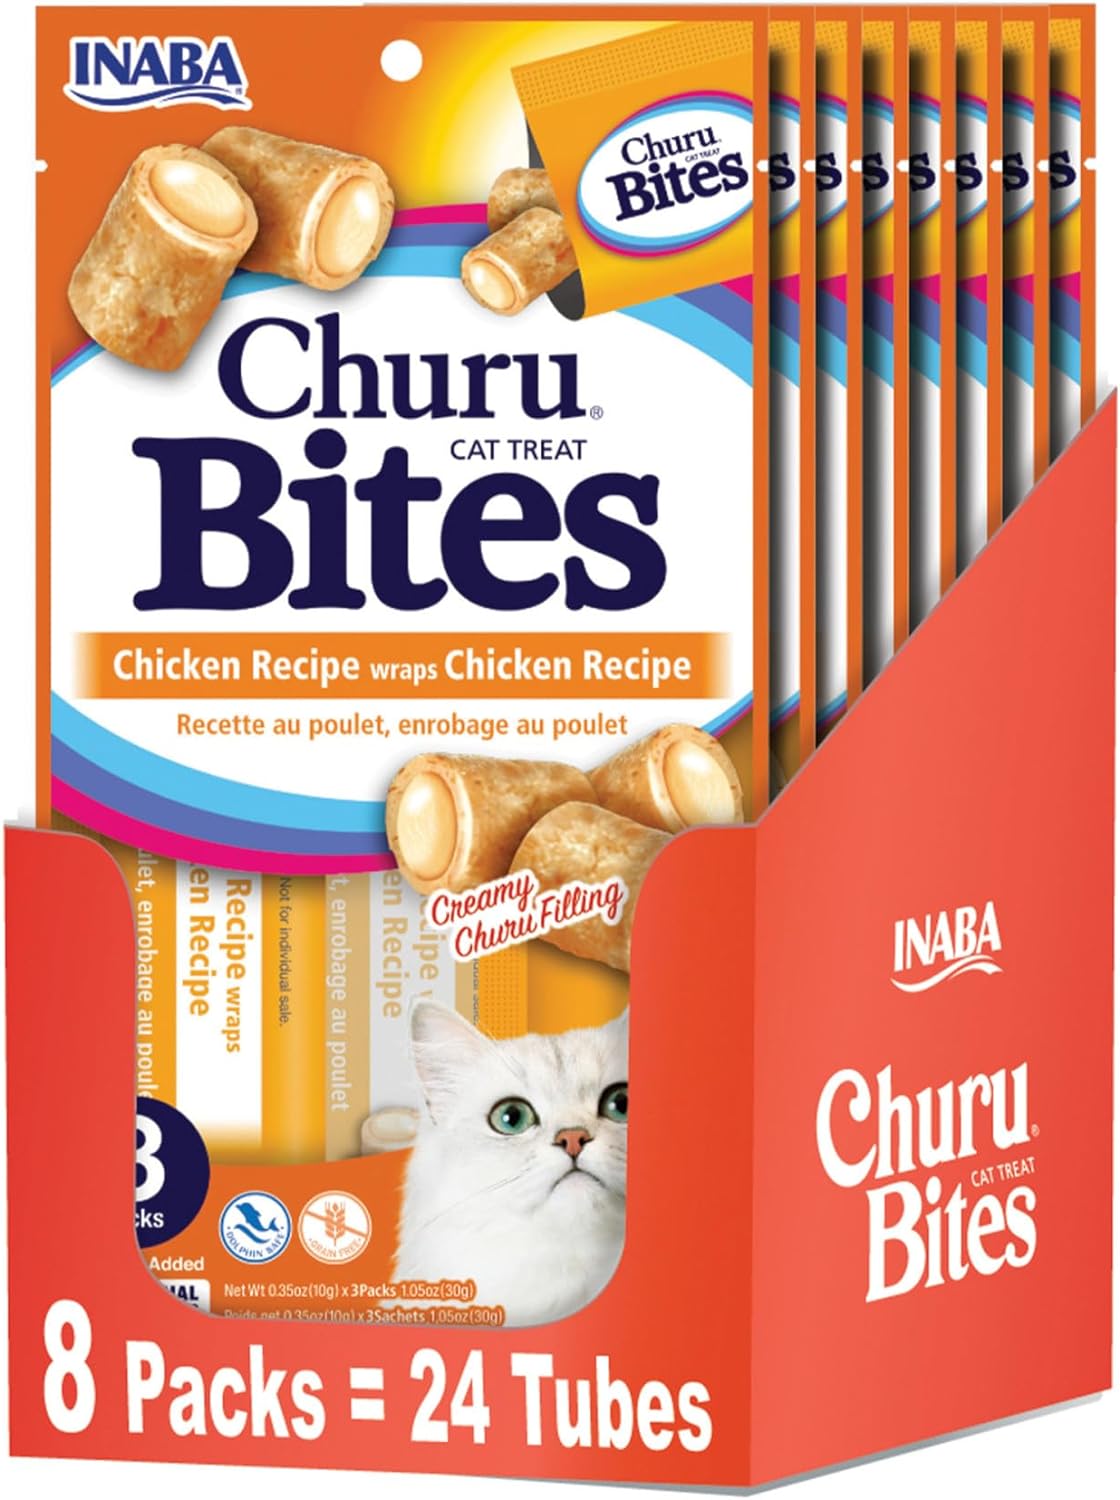 INABA Churu Bites for Cats, Soft Baked Chicken Churu Filled Cat Treats with Vitamin E, 0.35 Ounces Each Tube, 24 Tubes Total (3 per Pack), Chicken Recipe